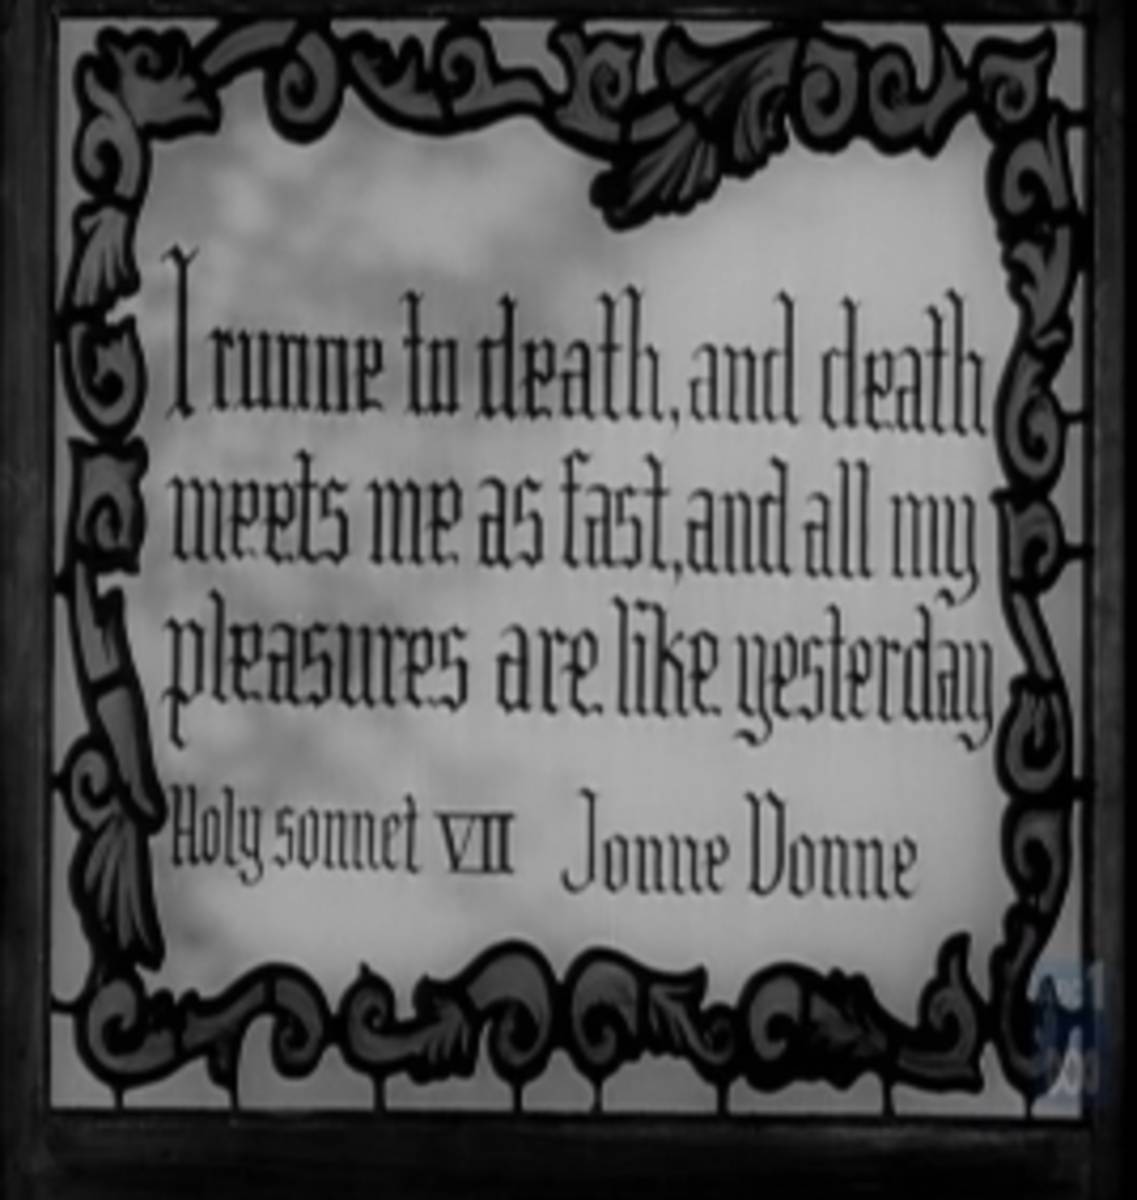 Title card quoting sonnet by Jonne Donne: "I run to death, and death meets me as fast, and all my pleasures are like yesterday"